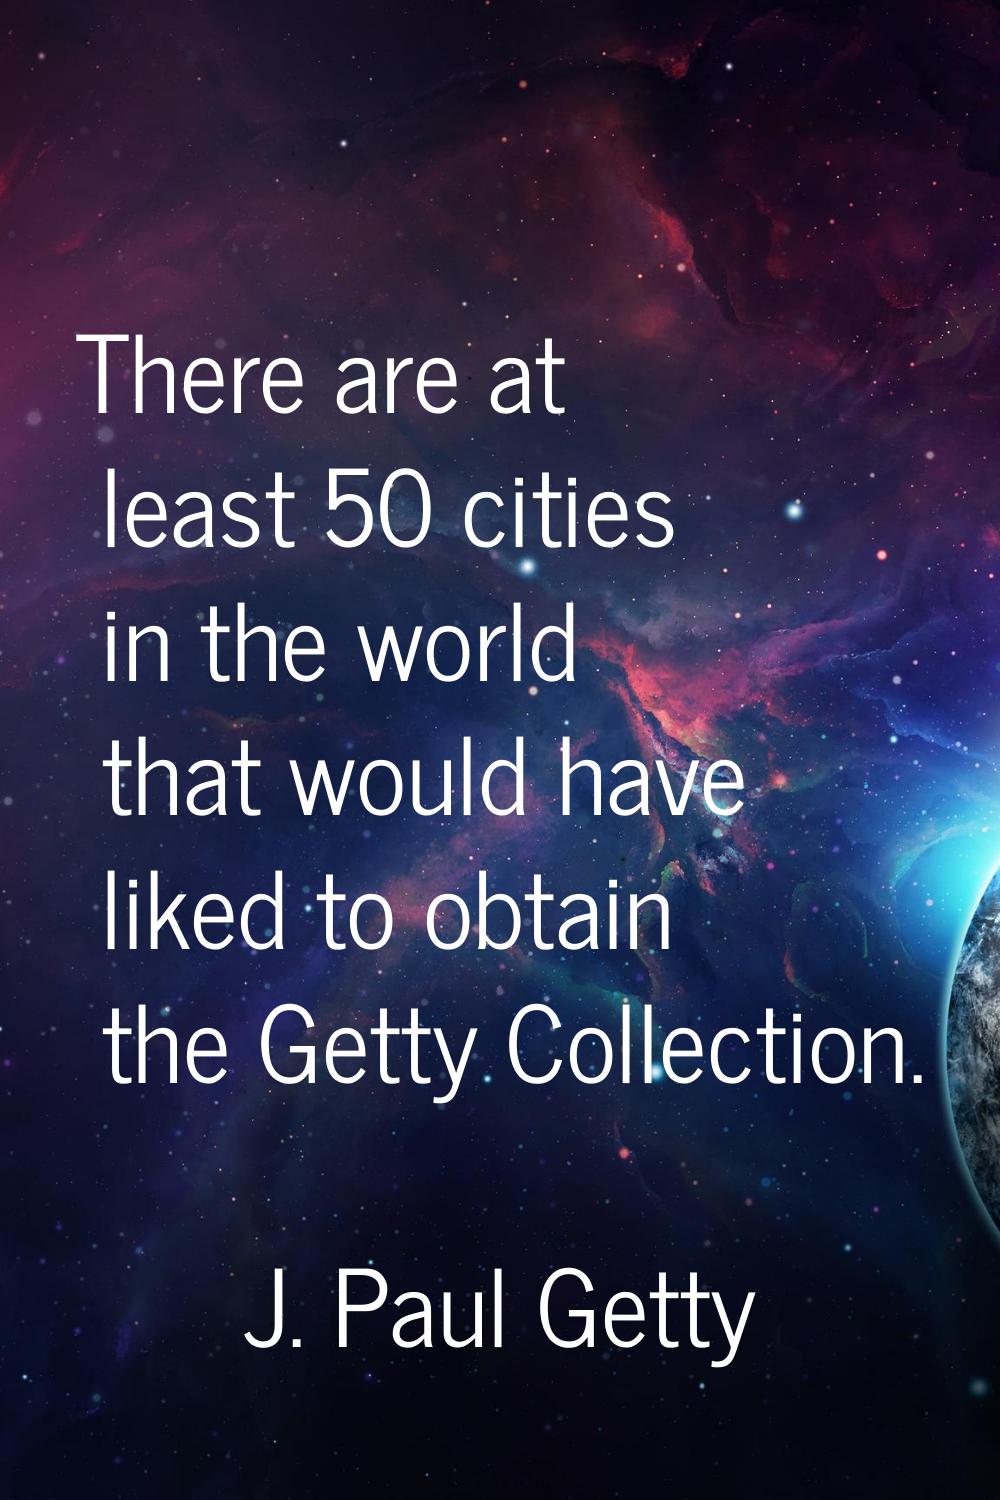 There are at least 50 cities in the world that would have liked to obtain the Getty Collection.